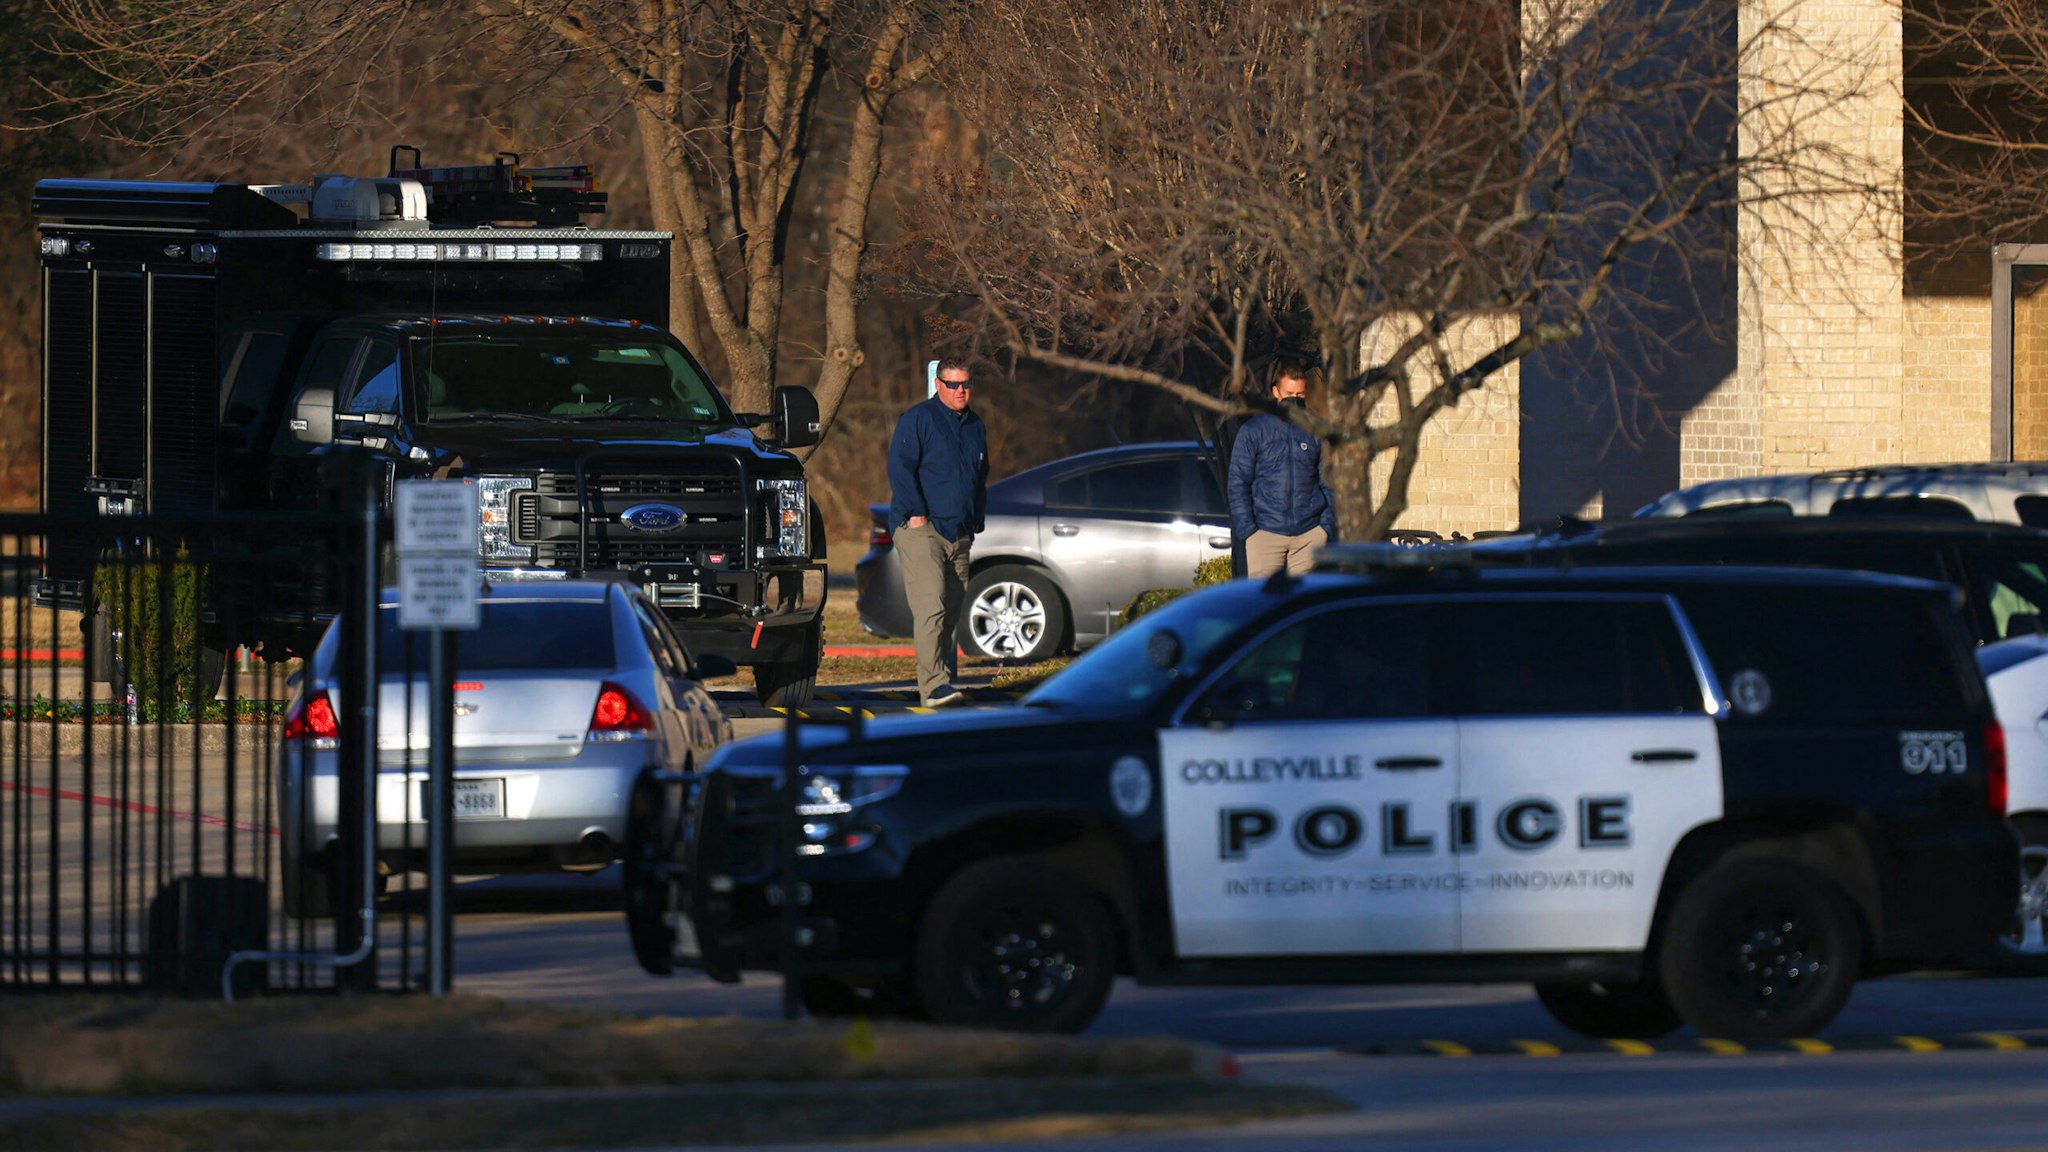 A Police car sits in front of the Congregation Beth Israel Synagogue in Colleyville, Texas, some 25 miles (40 kilometers) west of Dallas, on January 16, 2022. - All four people taken hostage in a more than 10-hour standoff at the Texas synagogue have been freed unharmed, police said late January 15, and their suspected captor is dead.